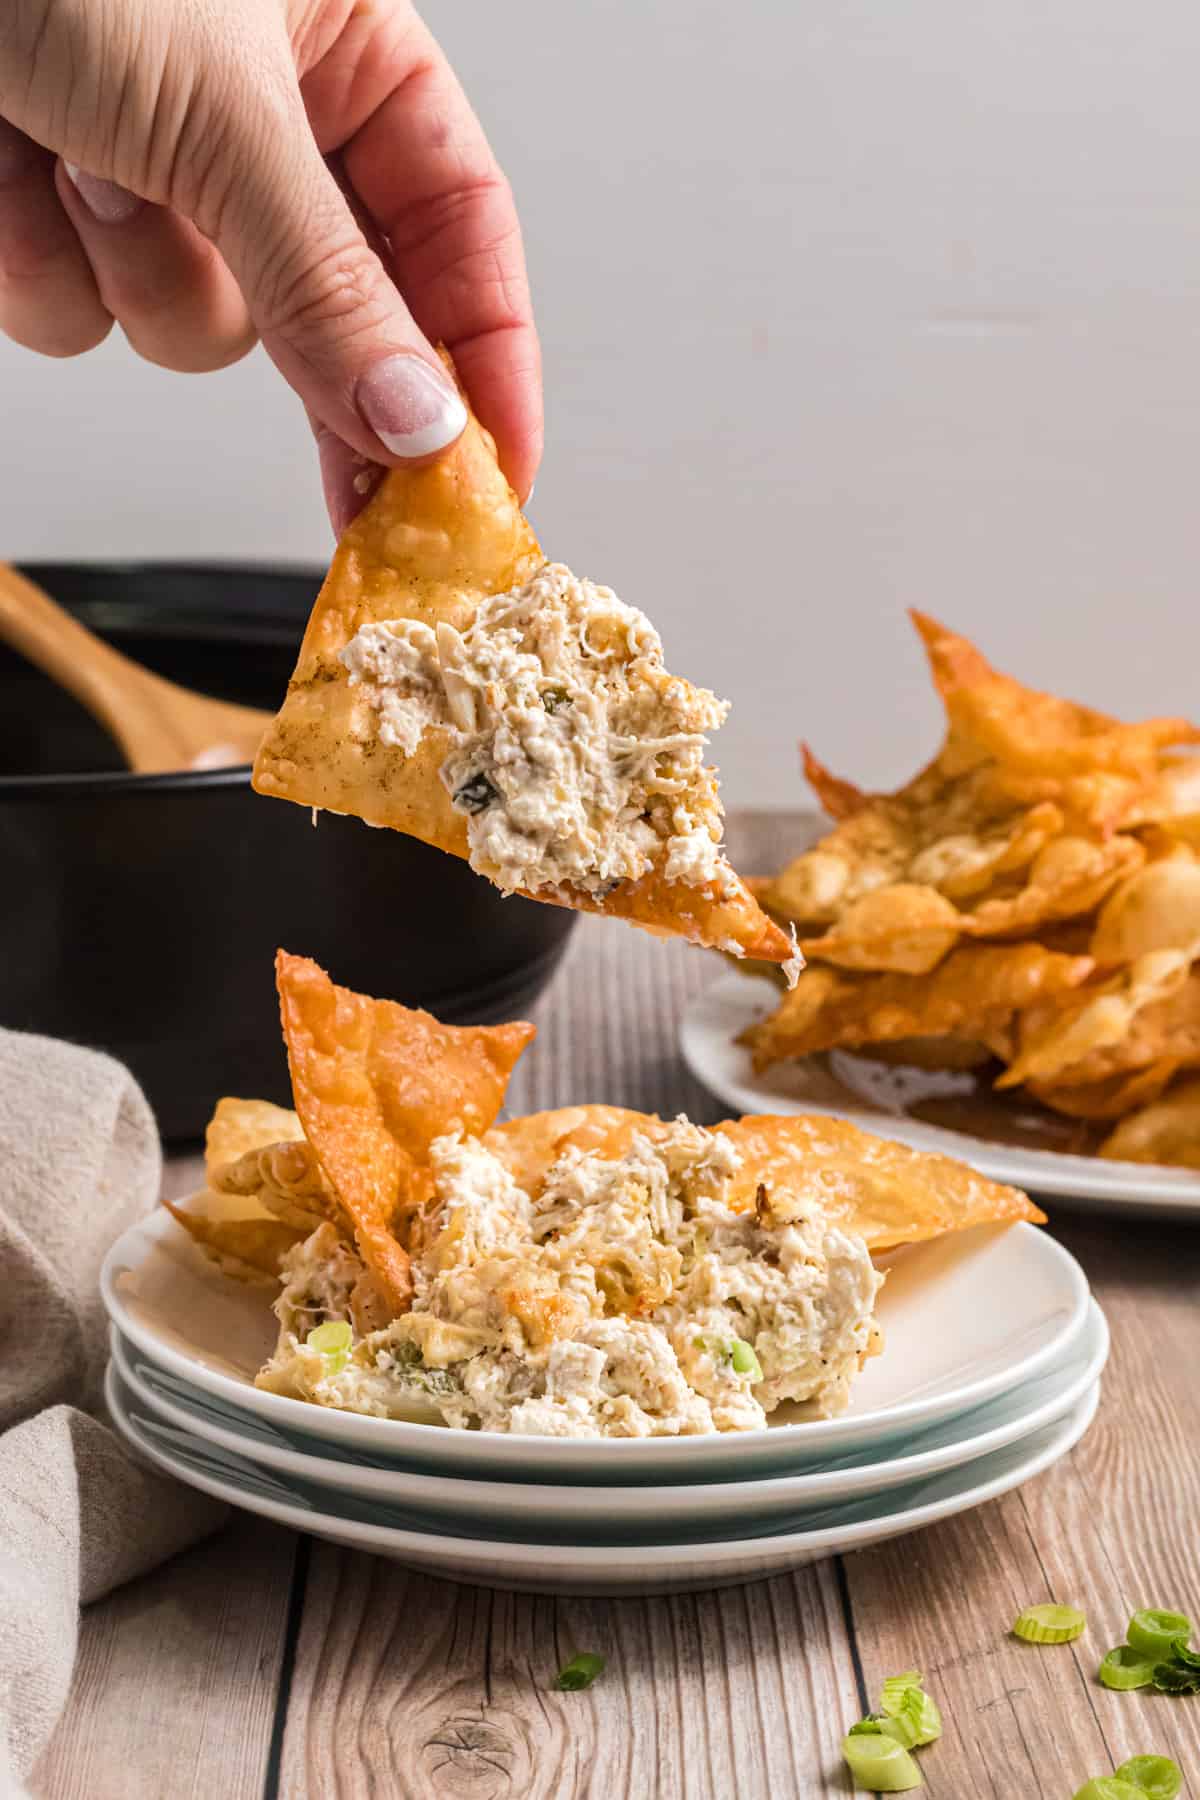 A chip that's topped with crab dip is being lifted by a hand from a white plate.